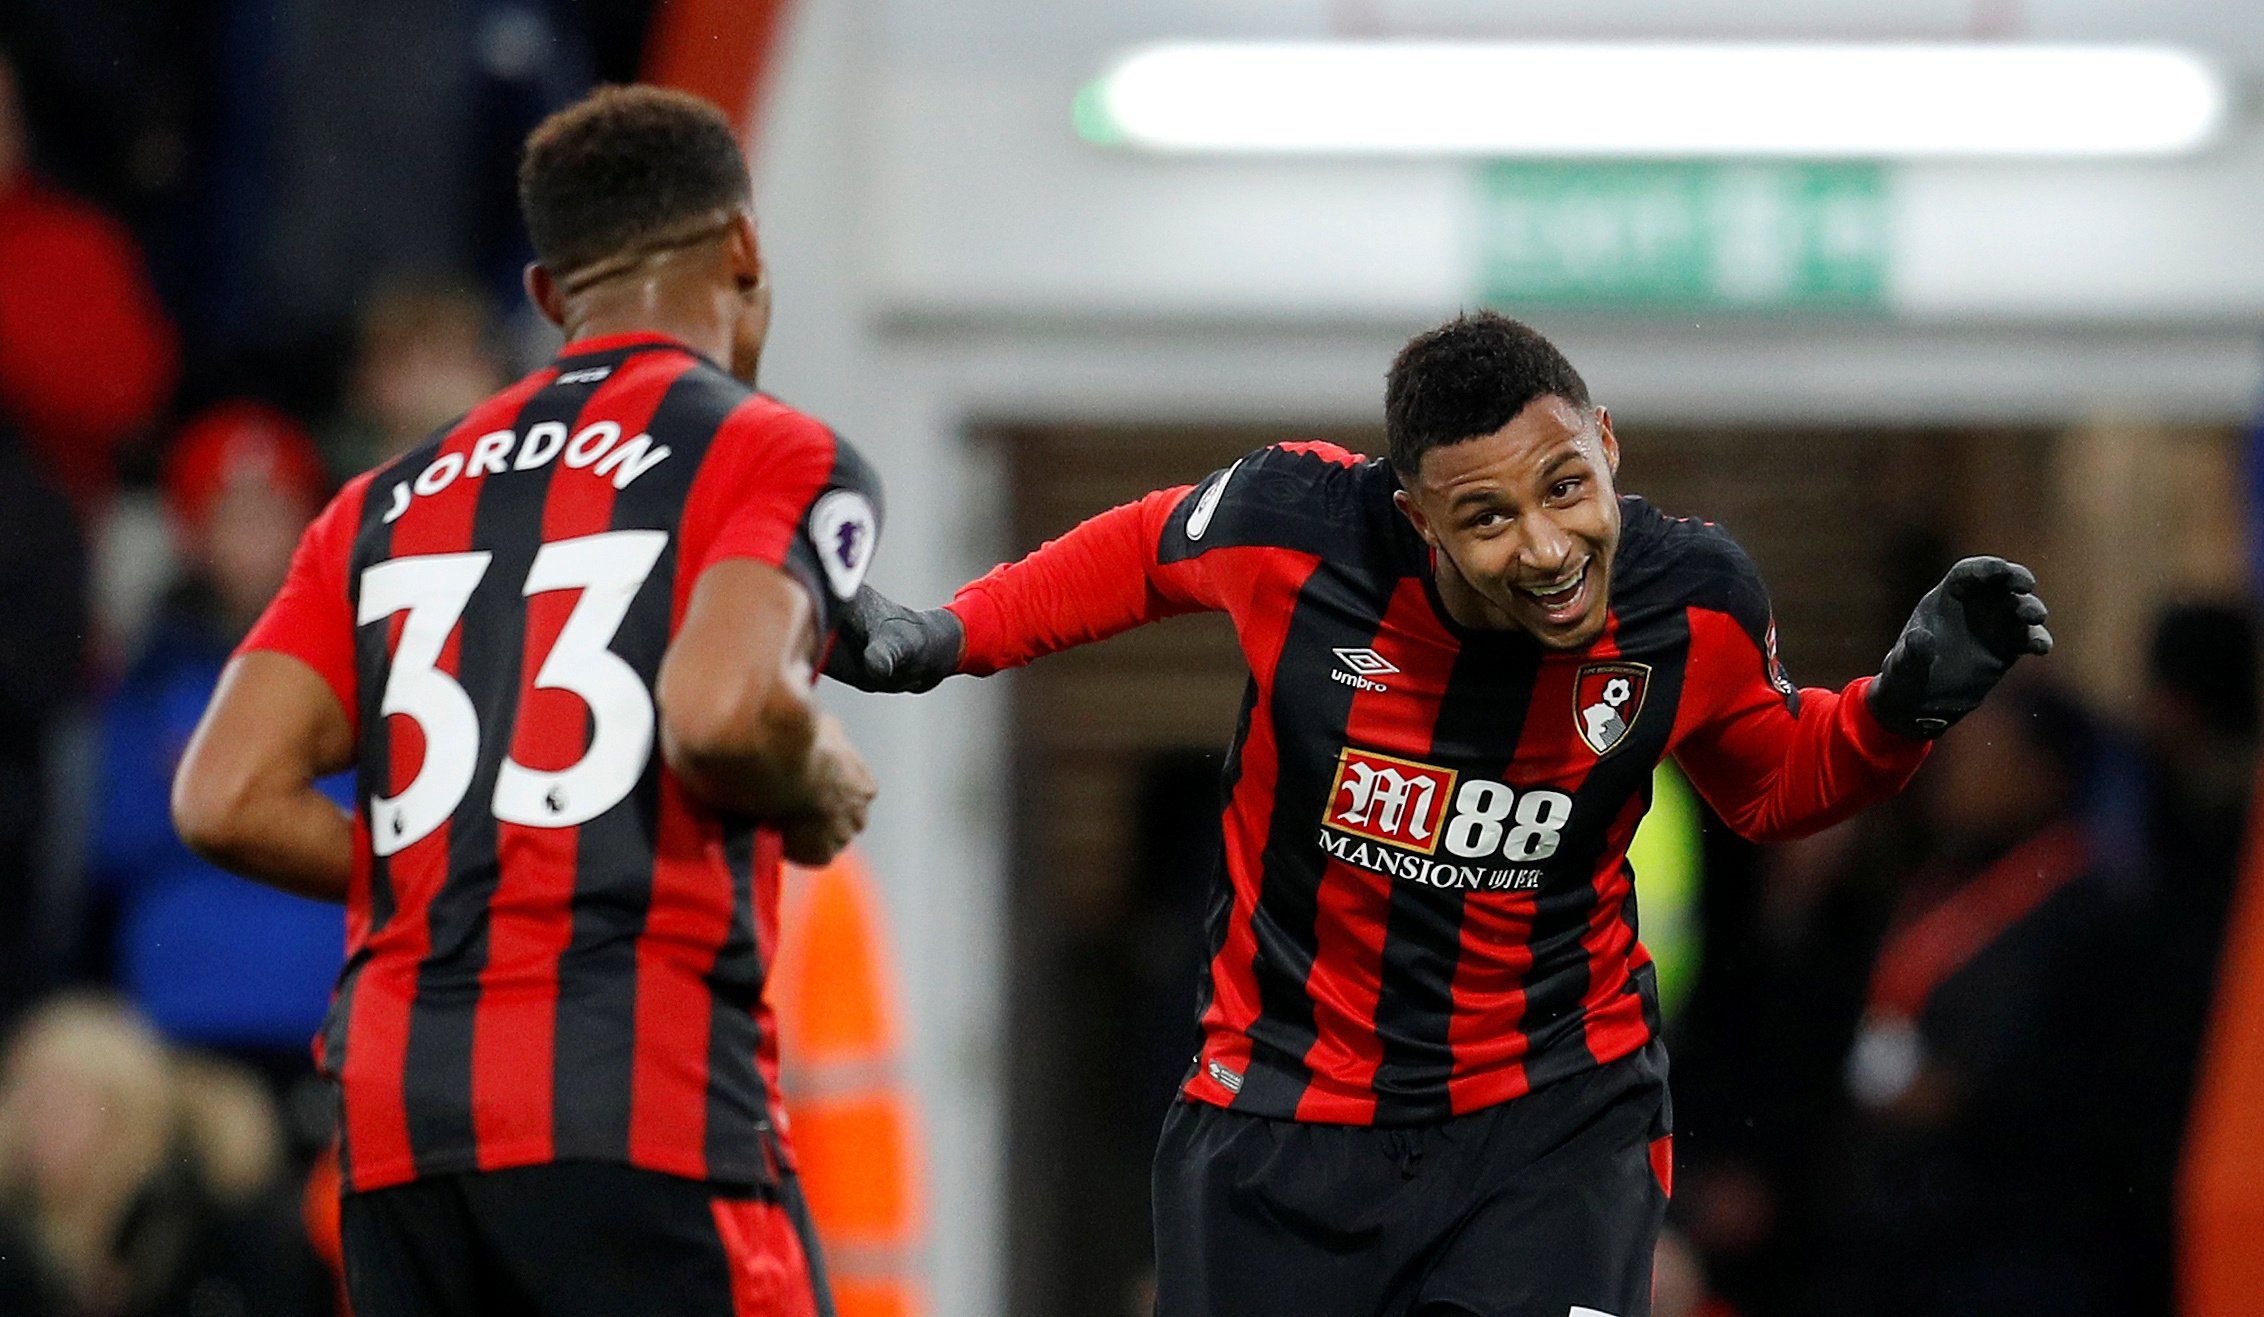 Bournemouth 2-1 Stoke City: Three talking points from the Vitality Stadium